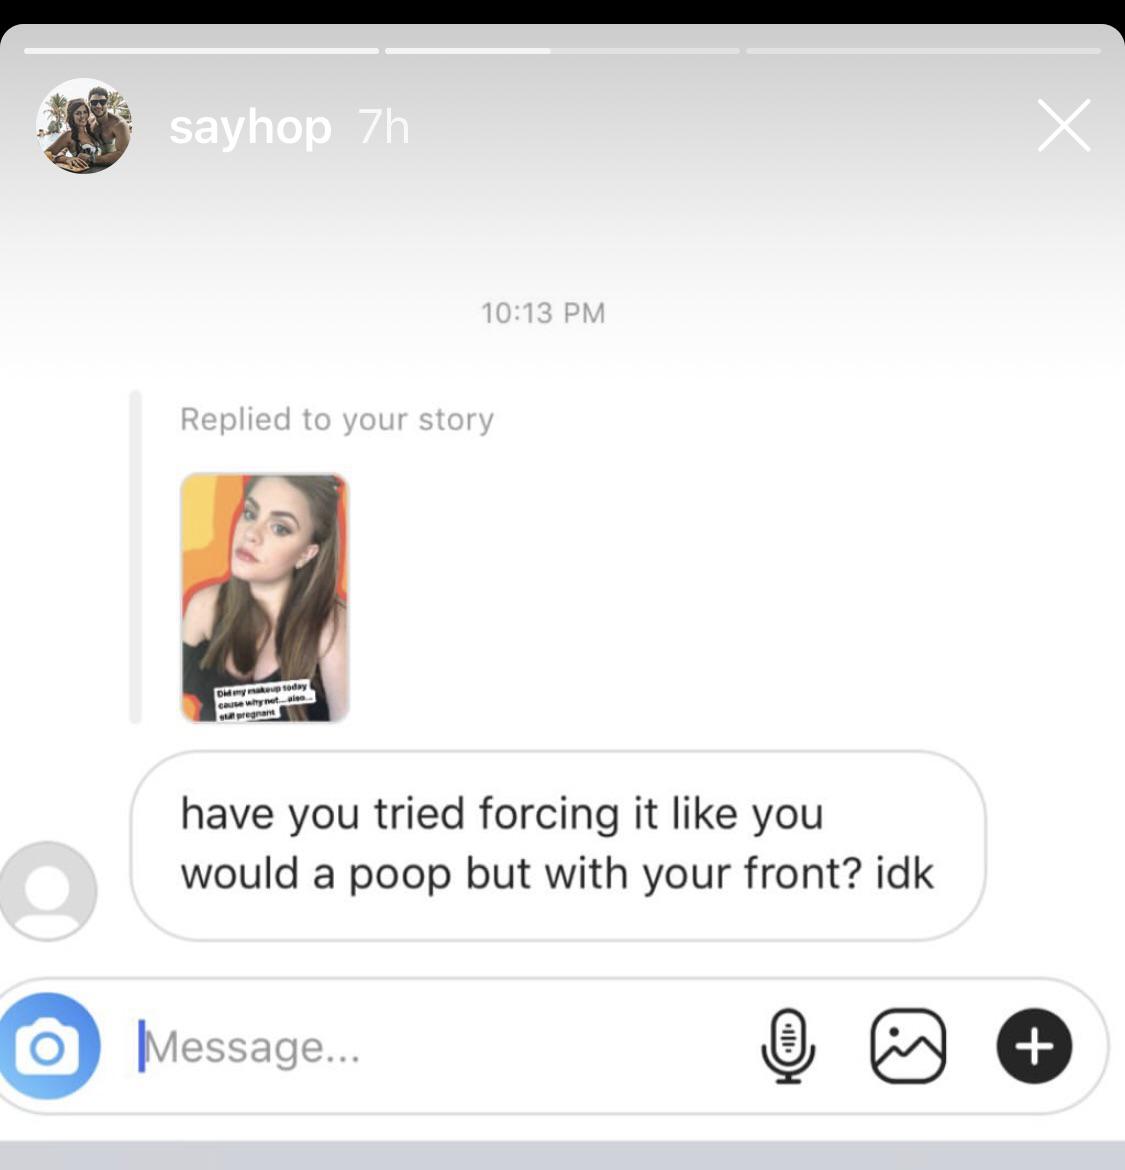 Thundrbro - sayhop 7h Replied to your story Or today Cahya grand have you tried forcing it you would a poop but with your front? idk O Message...